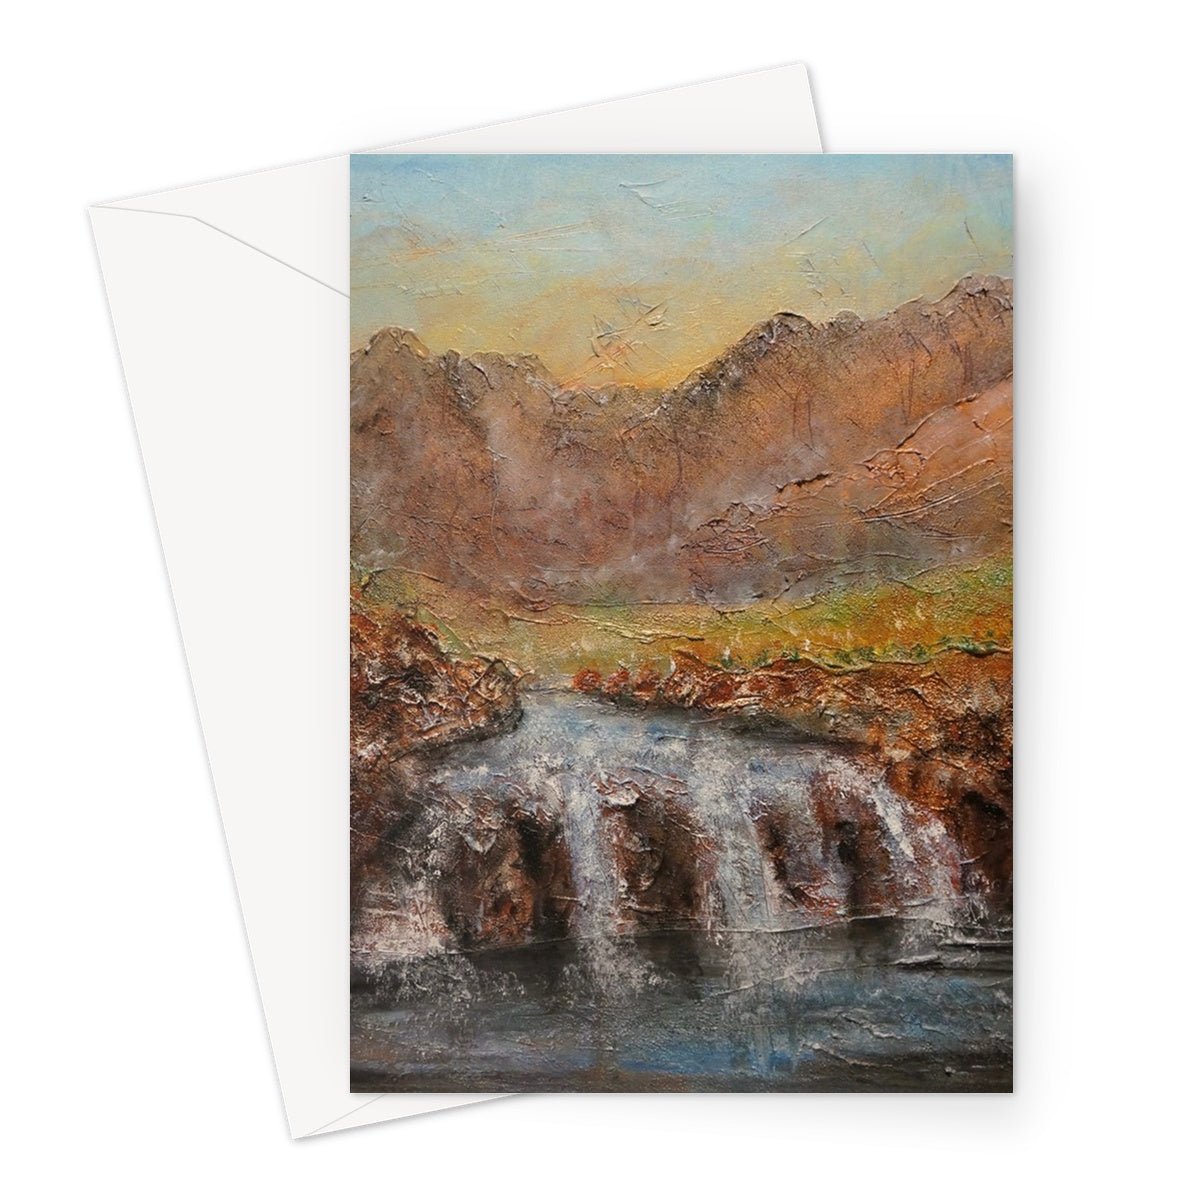 Fairy Pools Dawn Skye Art Gifts Greeting Card-Greetings Cards-Skye Art Gallery-A5 Portrait-10 Cards-Paintings, Prints, Homeware, Art Gifts From Scotland By Scottish Artist Kevin Hunter